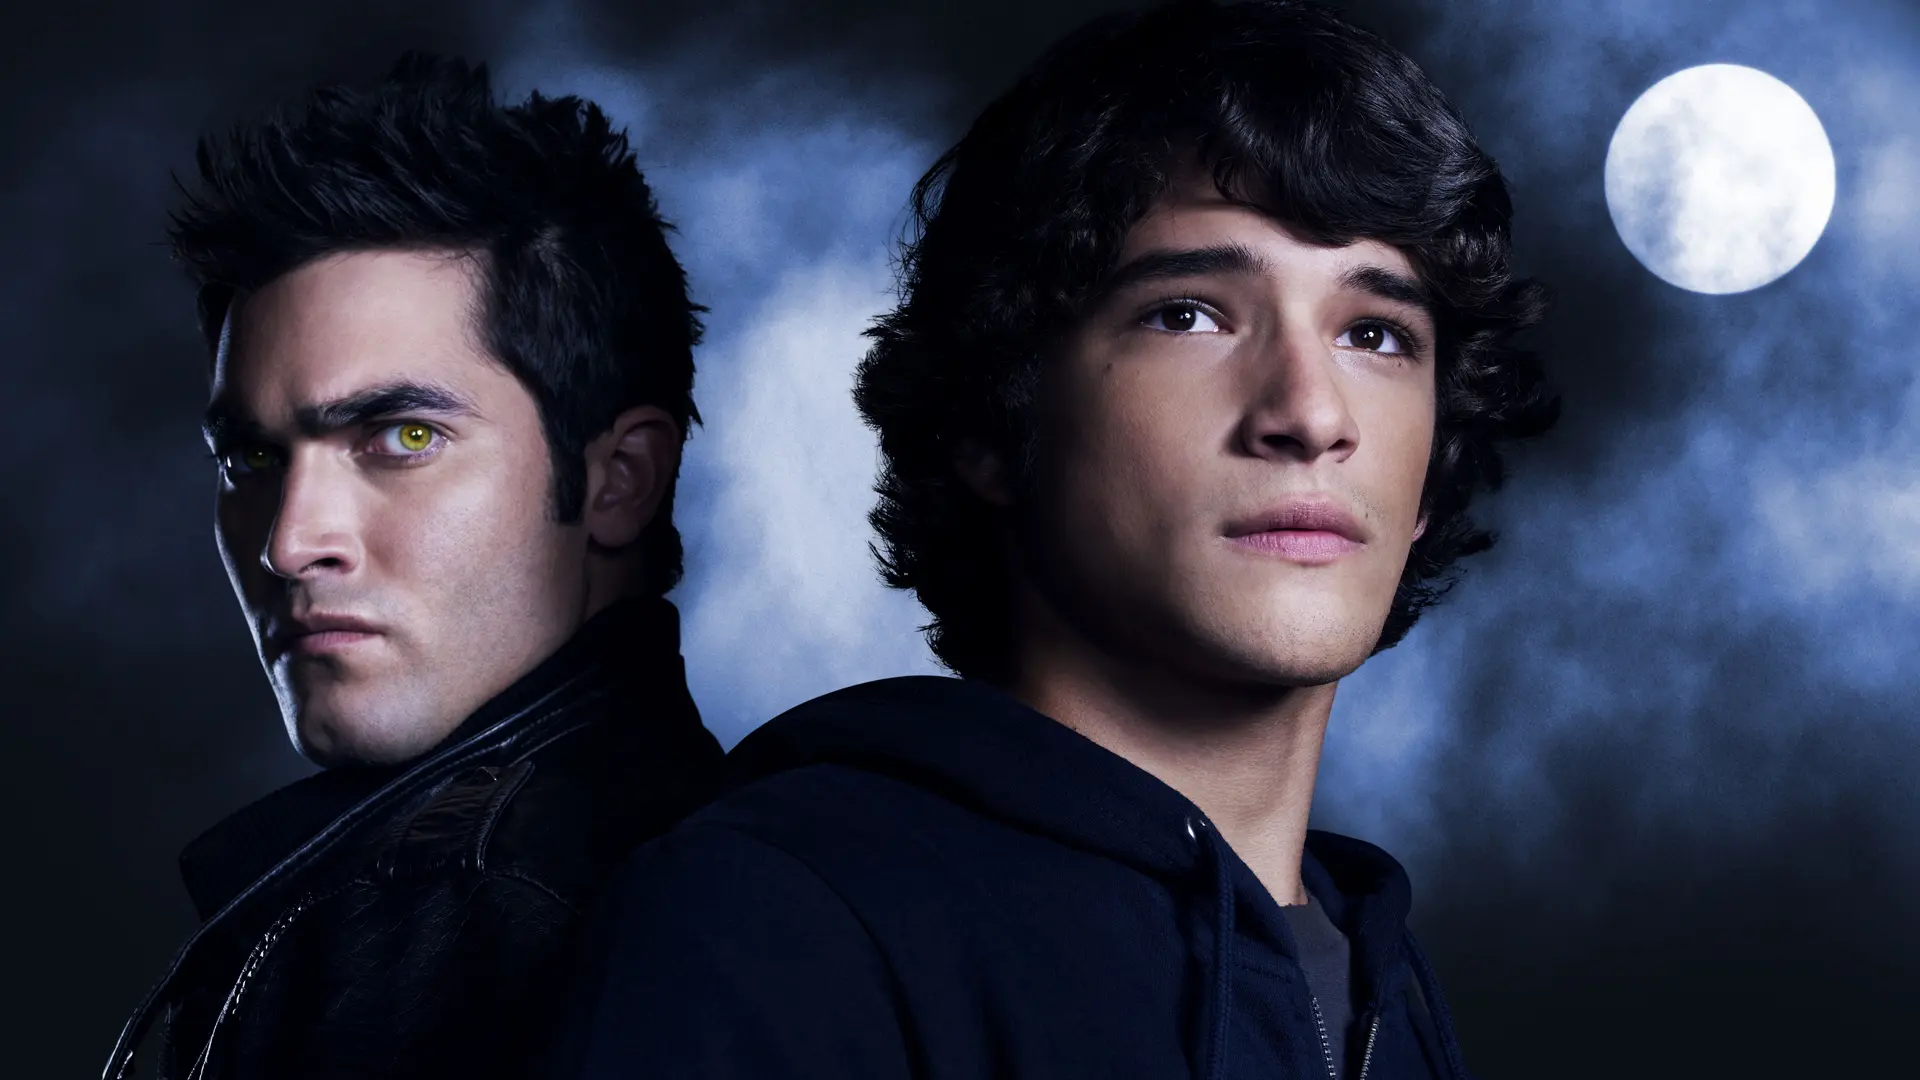 TV Show Teen Wolf wallpaper 2 | Background Image